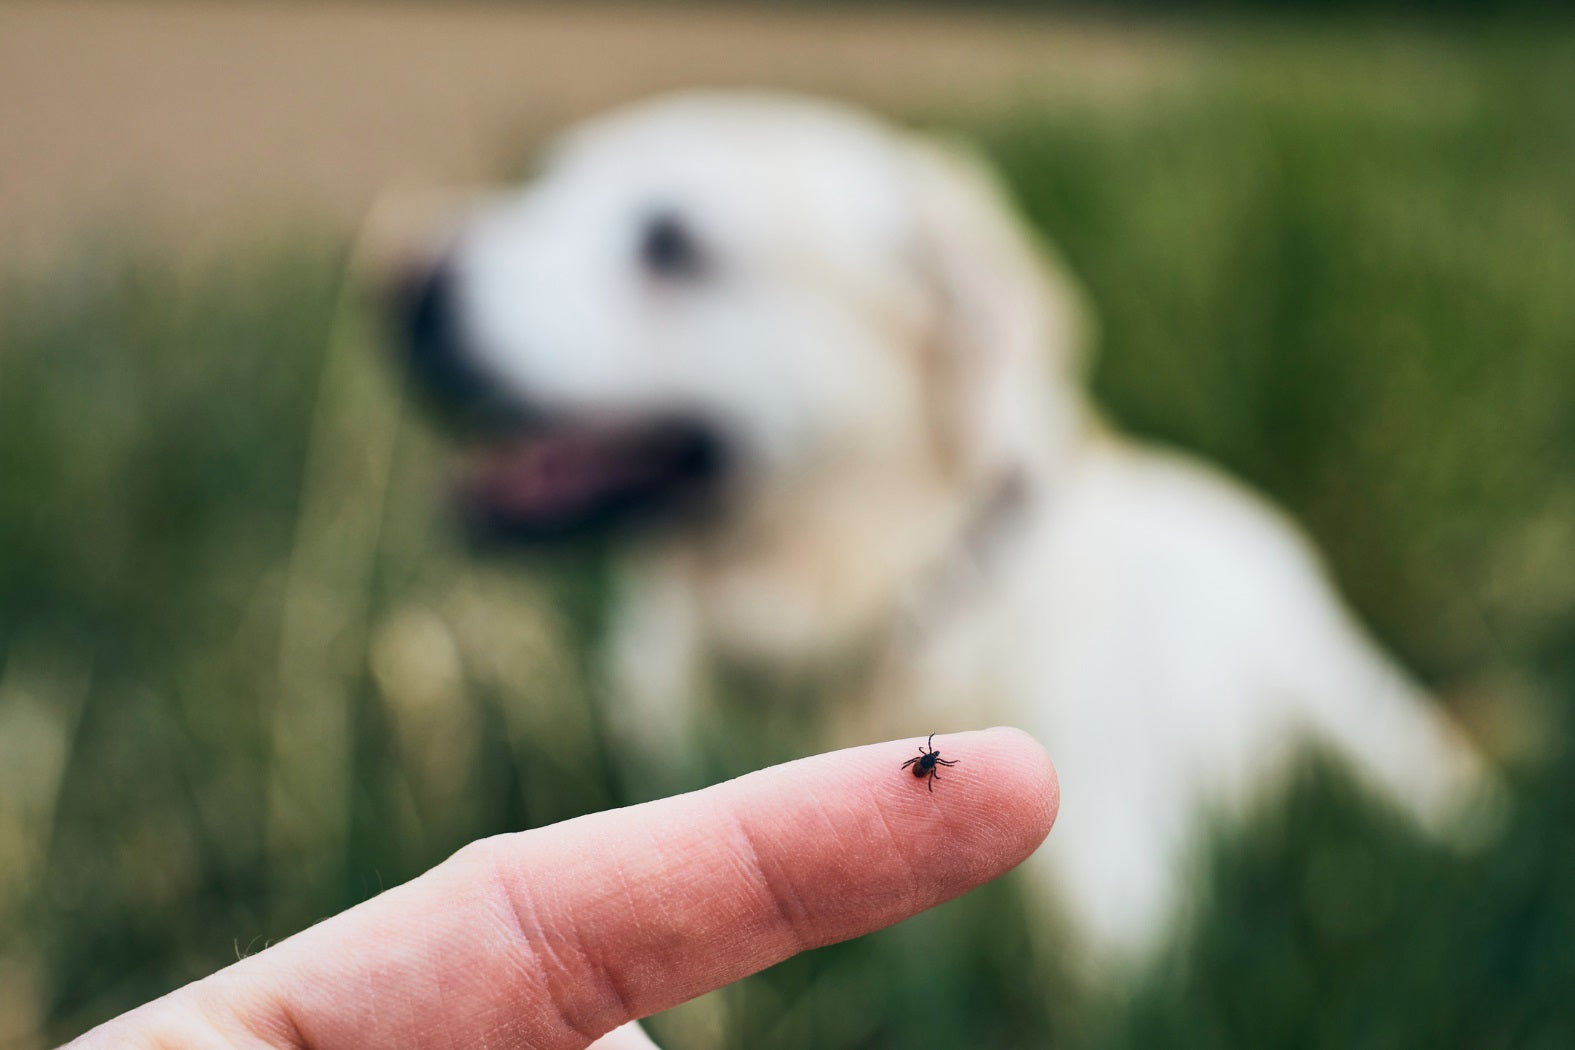 Tick on a human finger with dog in background